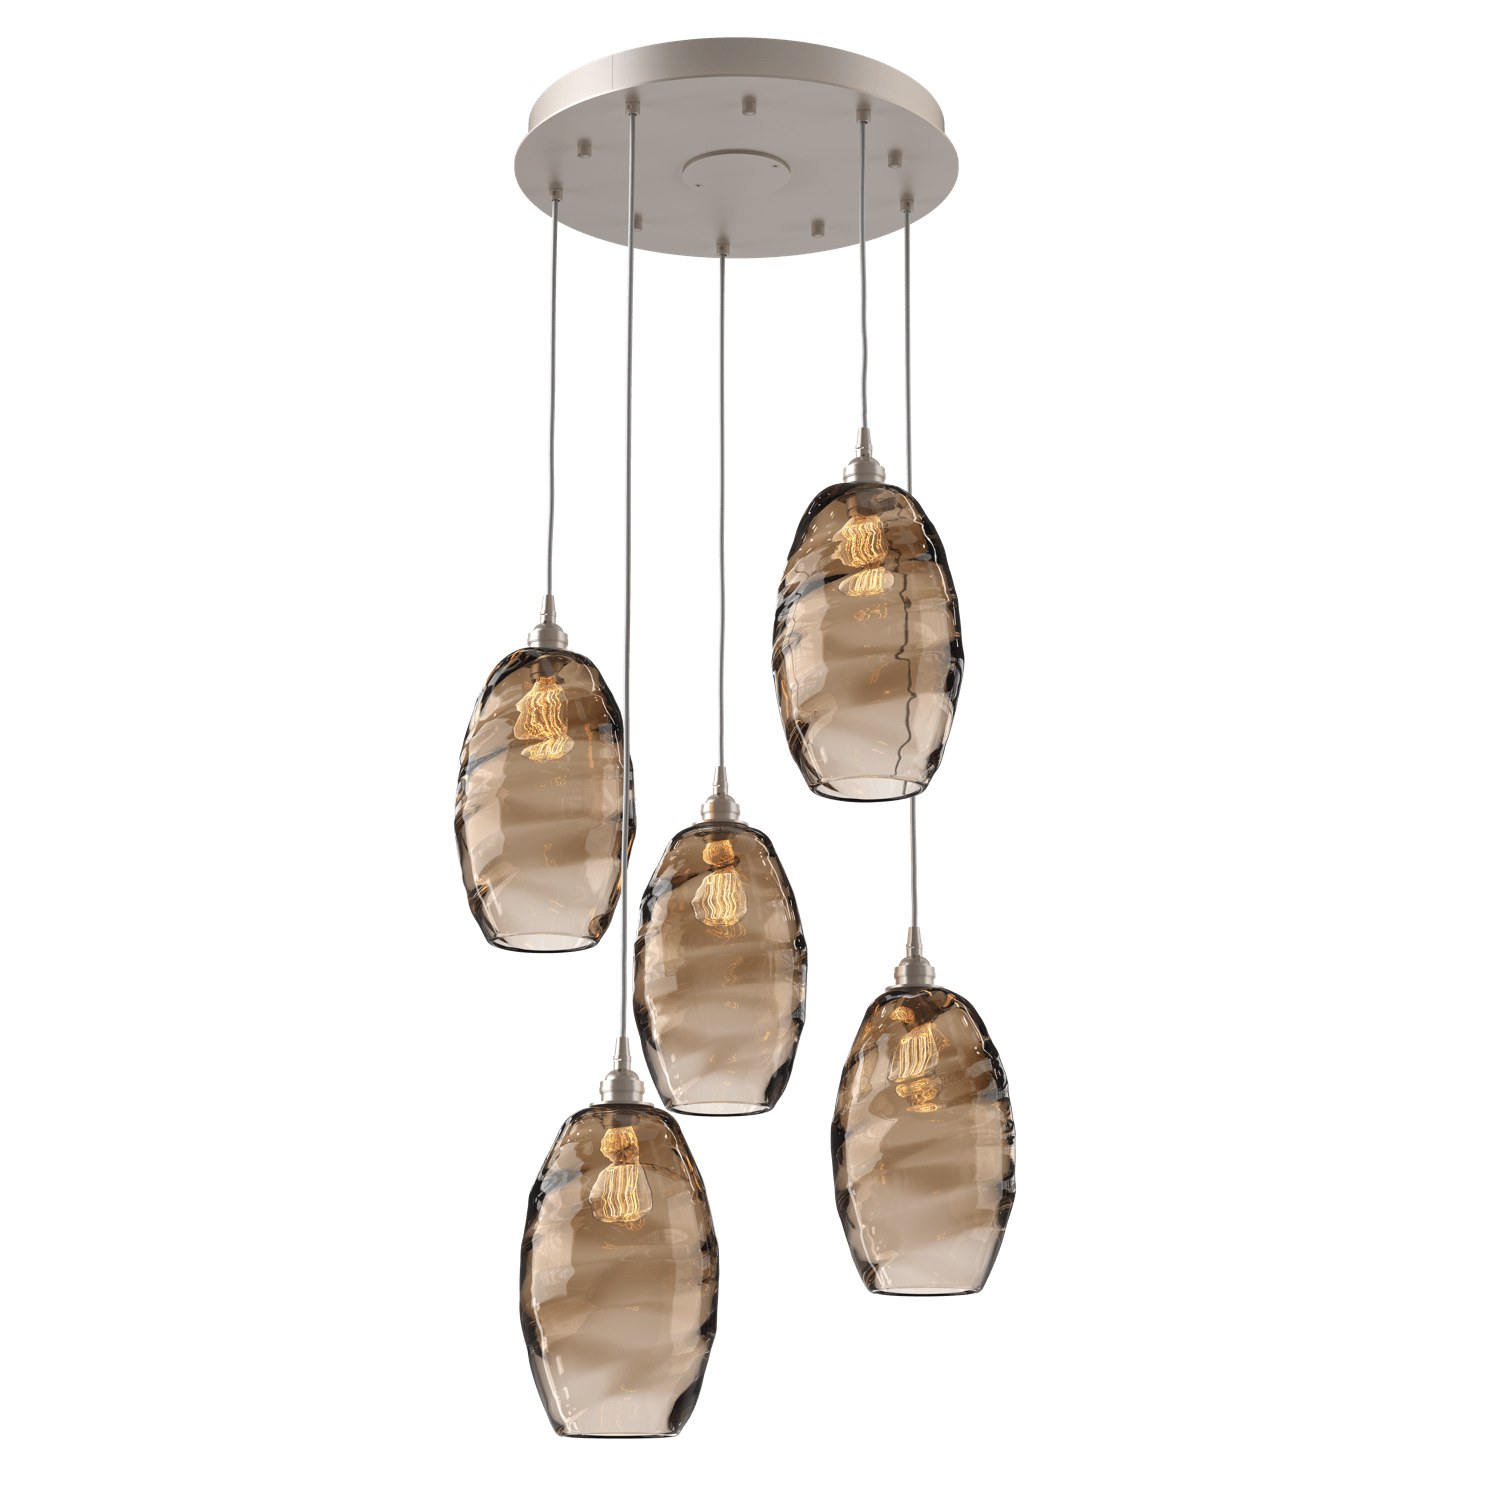 CHB0035-05-BS-OB-Hammerton-Studio-Optic-Blown-Glass-Elisse-5-light-round-pendant-chandelier-with-metallic-beige-silver-finish-and-optic-bronze-blown-glass-shades-and-incandescent-lamping